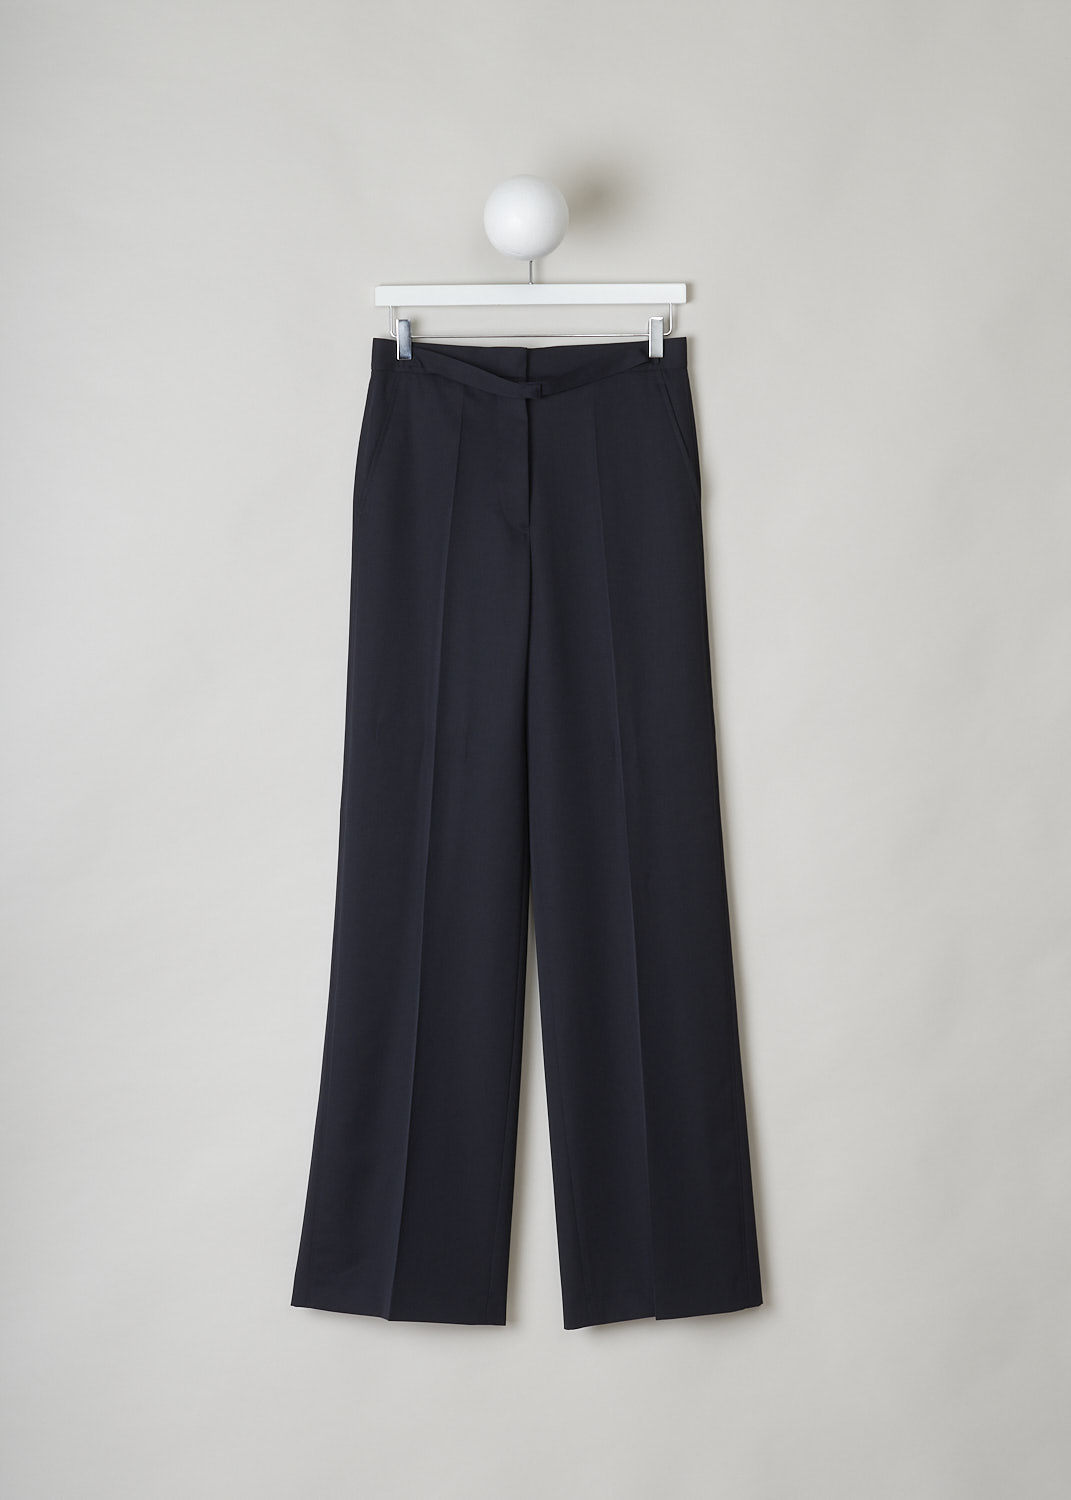 JIL SANDER, MIDNIGHT BLUE WIDE-LEG PANTS, JSPN302220_WN200300_402, Blue, Front, These navy blue wool pants have a narrow waistband with, attached in the front, a narrow belt-like band with a concealed button closure. These pants have a concealed clasp and button closure. The wide pant legs have pressed creases. These pants have slanted pockets in the front and welt pockets in the back. 
